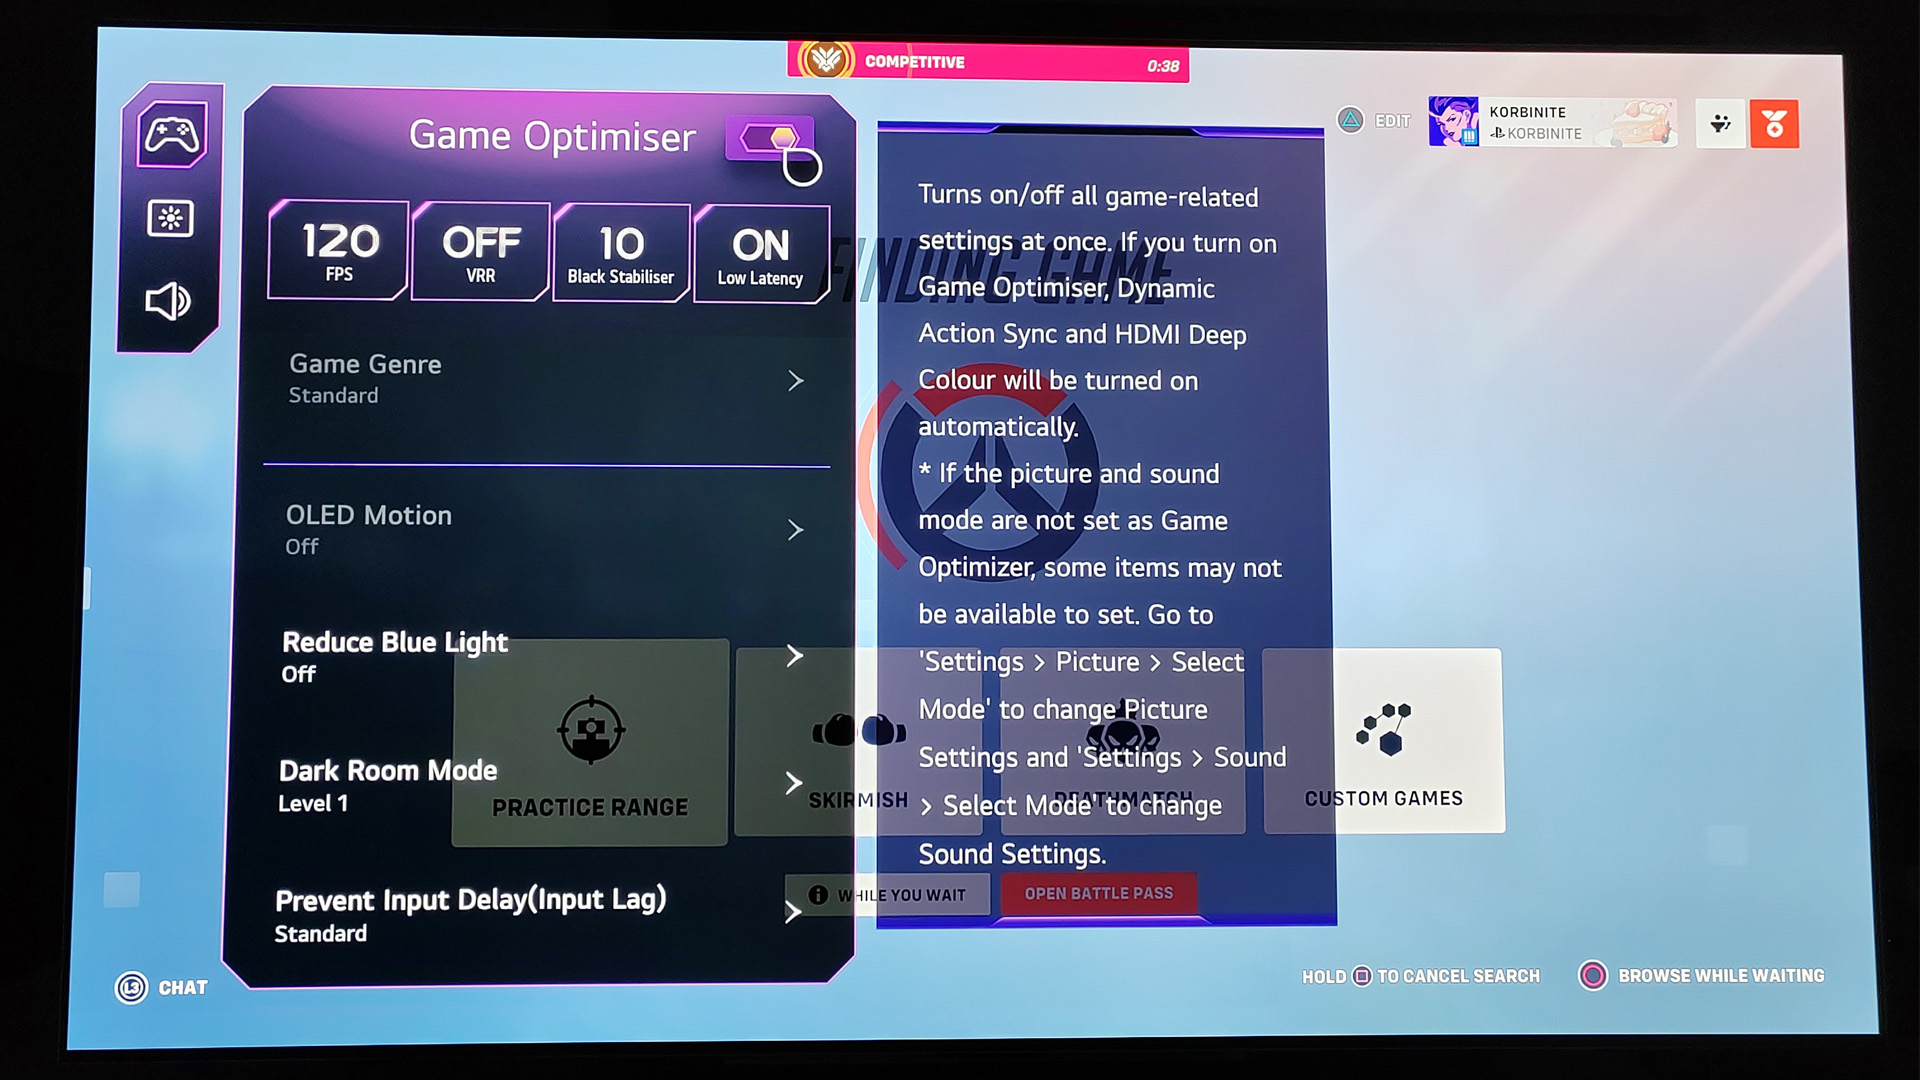 LG OLED G3's game optimizer showing the UI menu and options over a the Overwatch in-game menus.